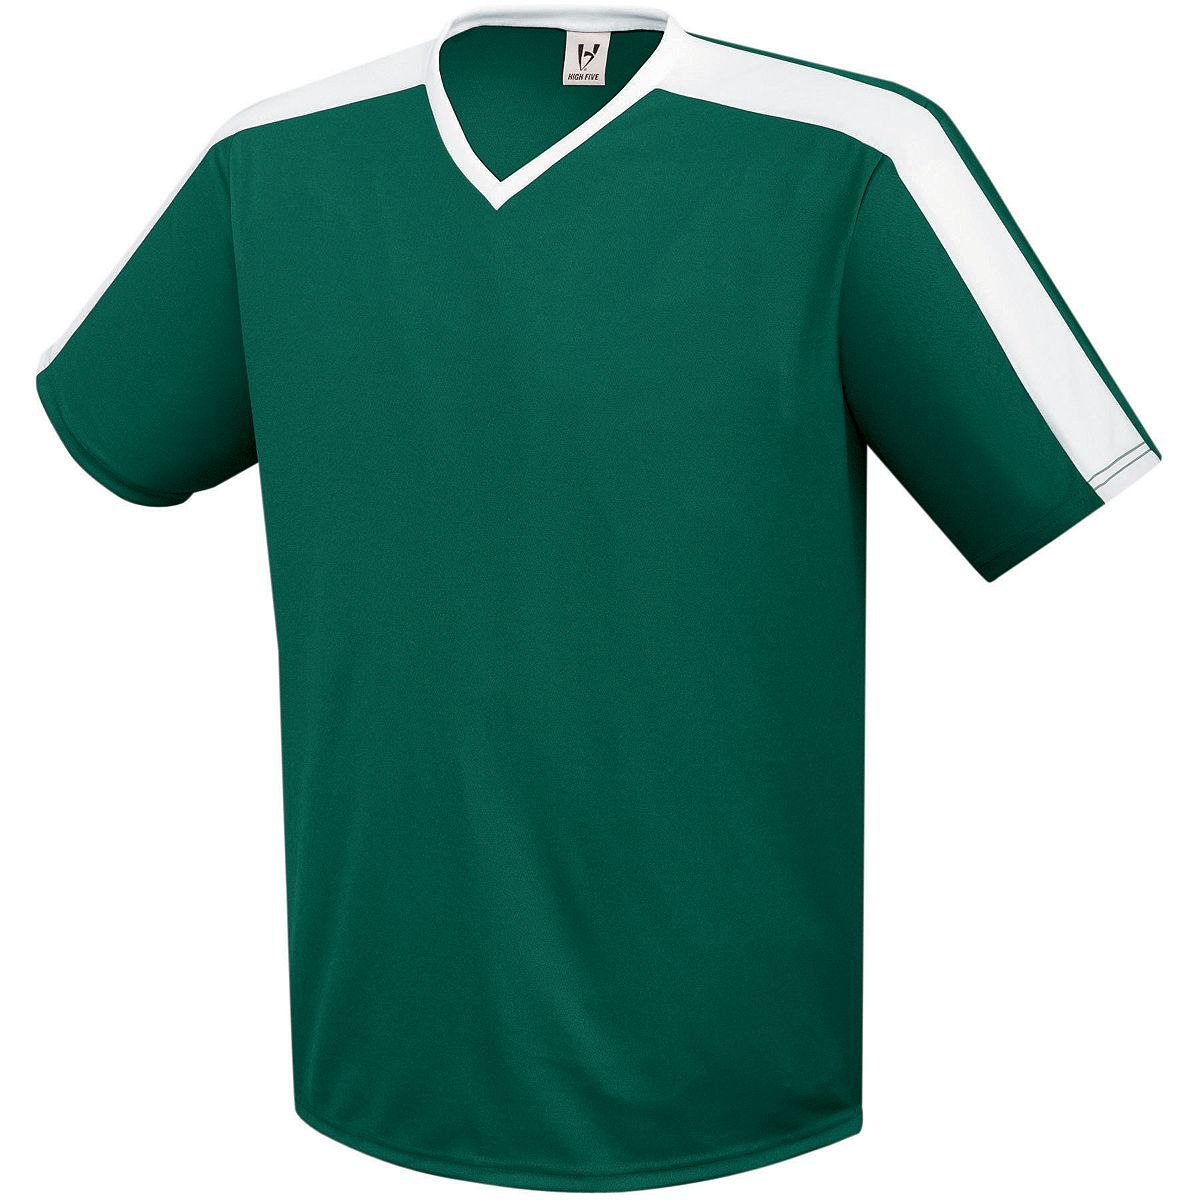 High 5 Youth Genesis Soccer Jersey in Forest/White  -Part of the Youth, Youth-Jersey, High5-Products, Soccer, Shirts, All-Sports-1 product lines at KanaleyCreations.com